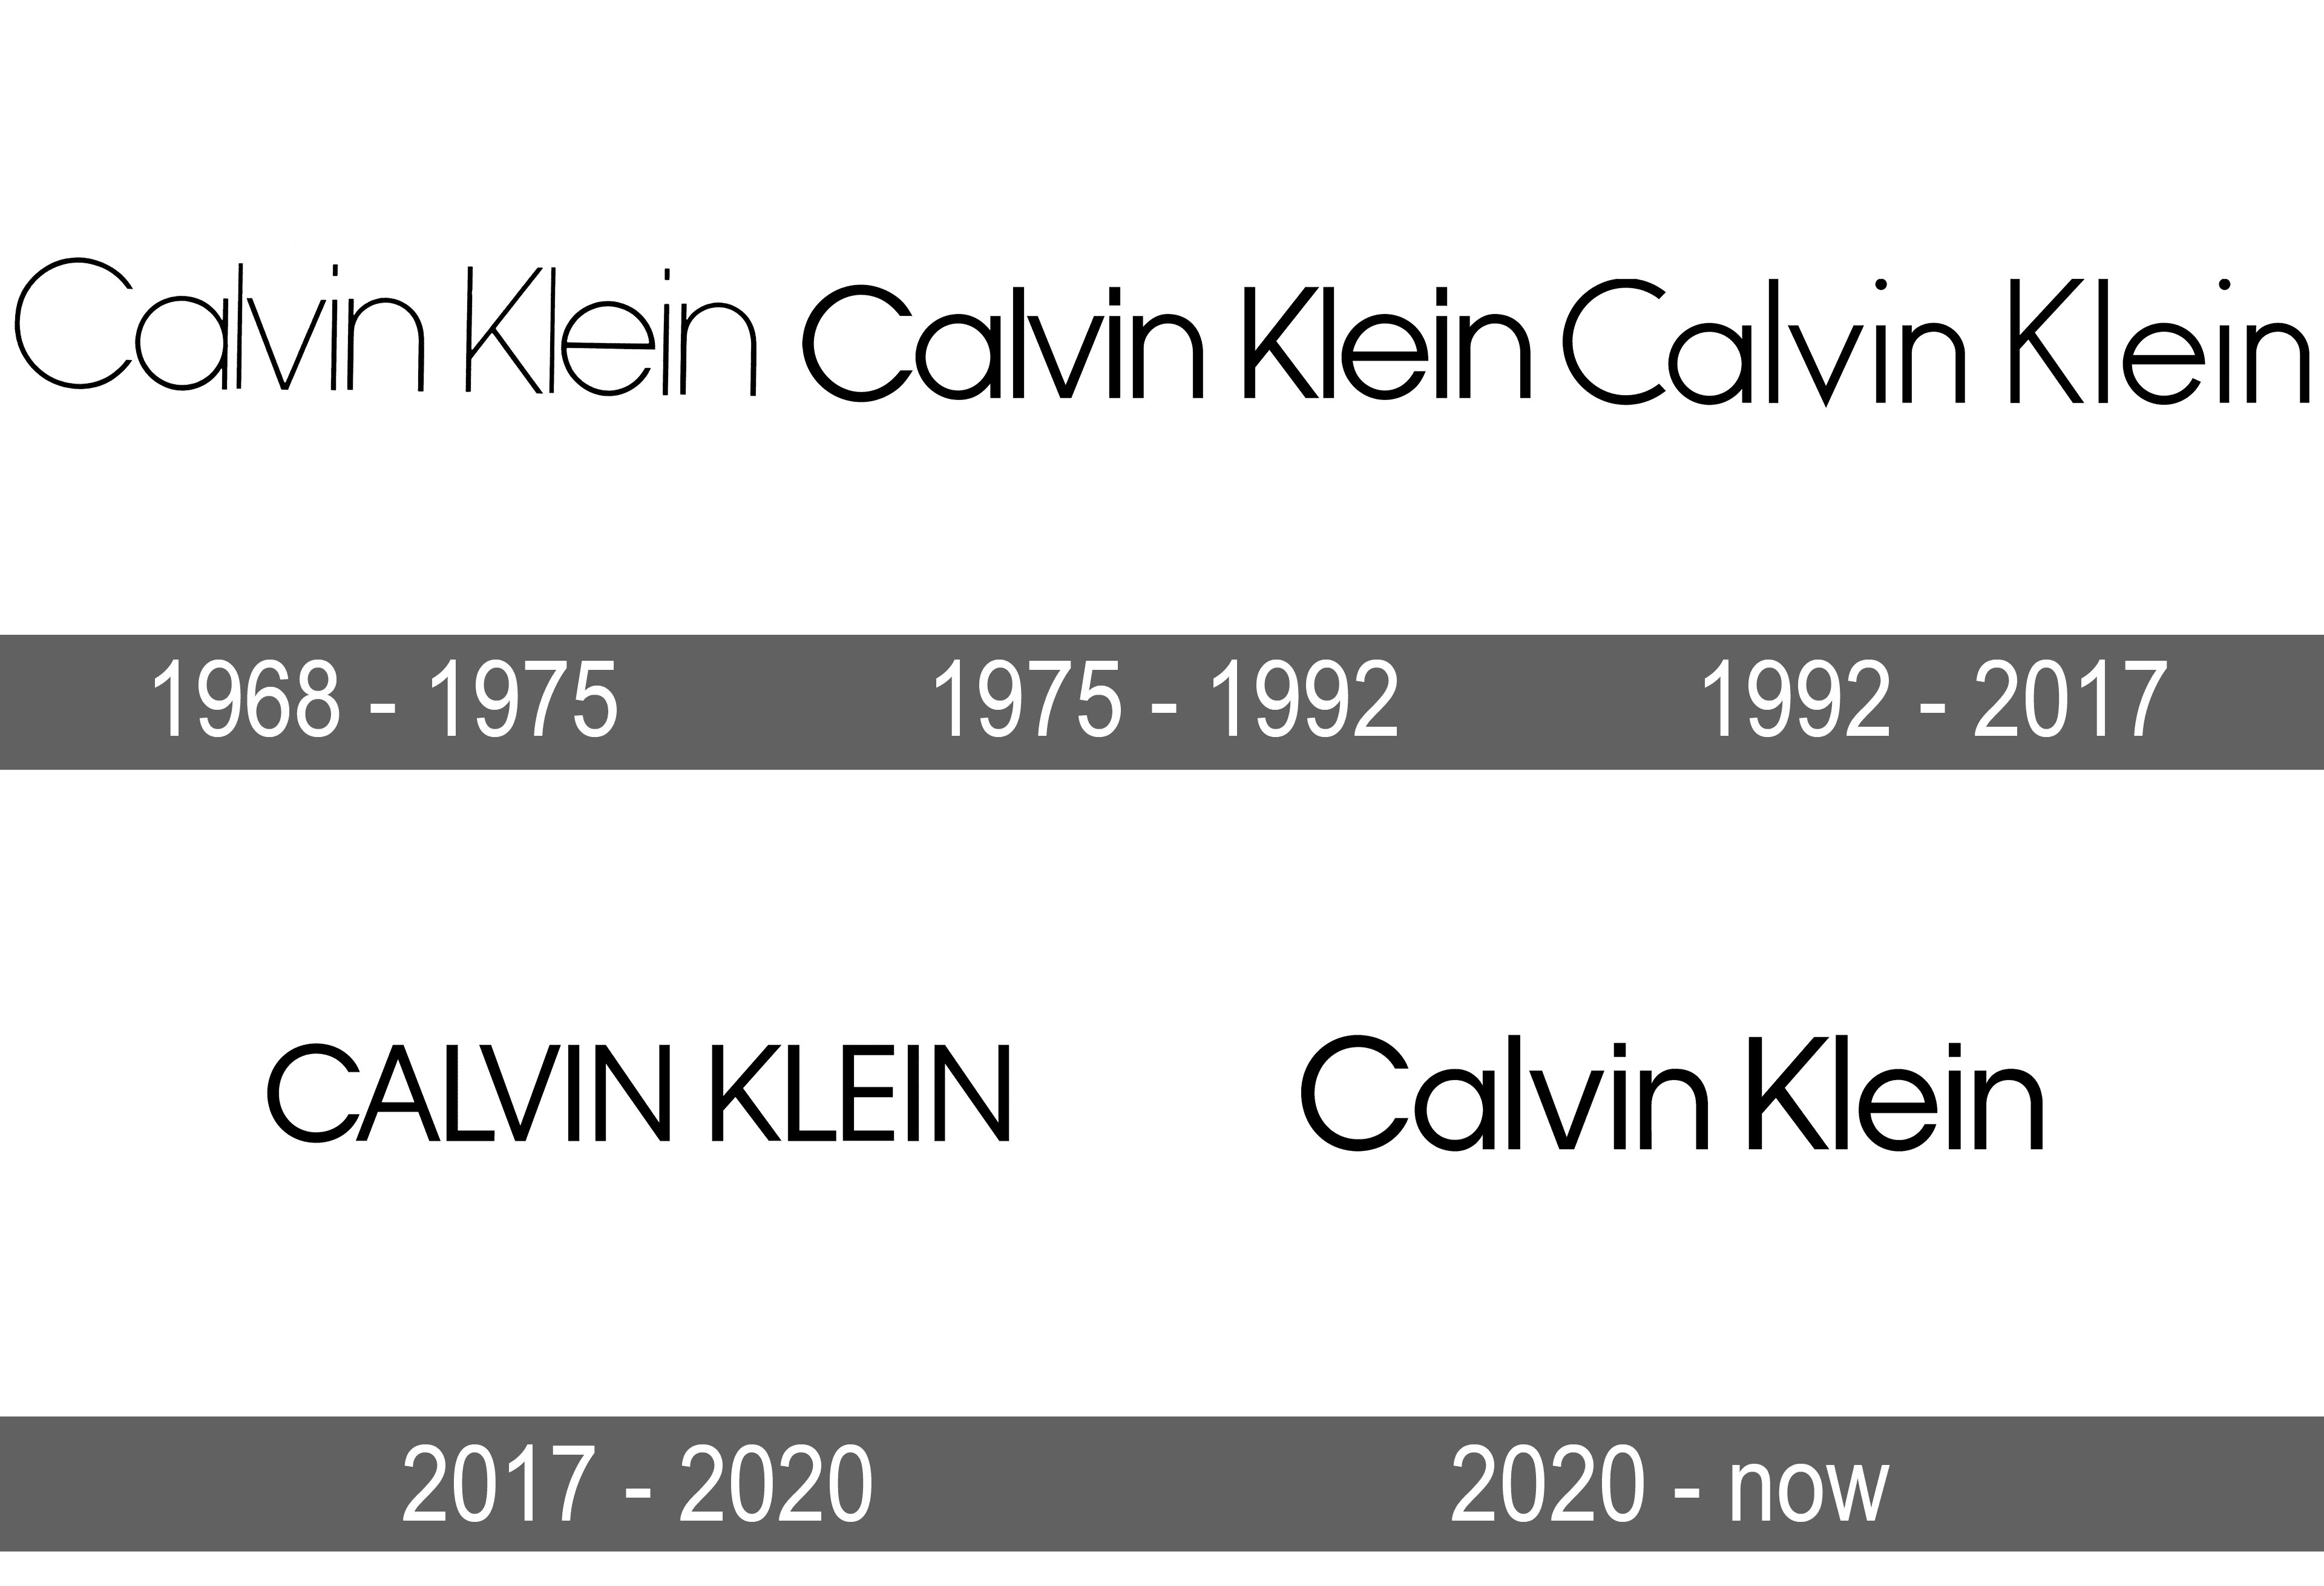 Calvin Klein Logo and the history of the company